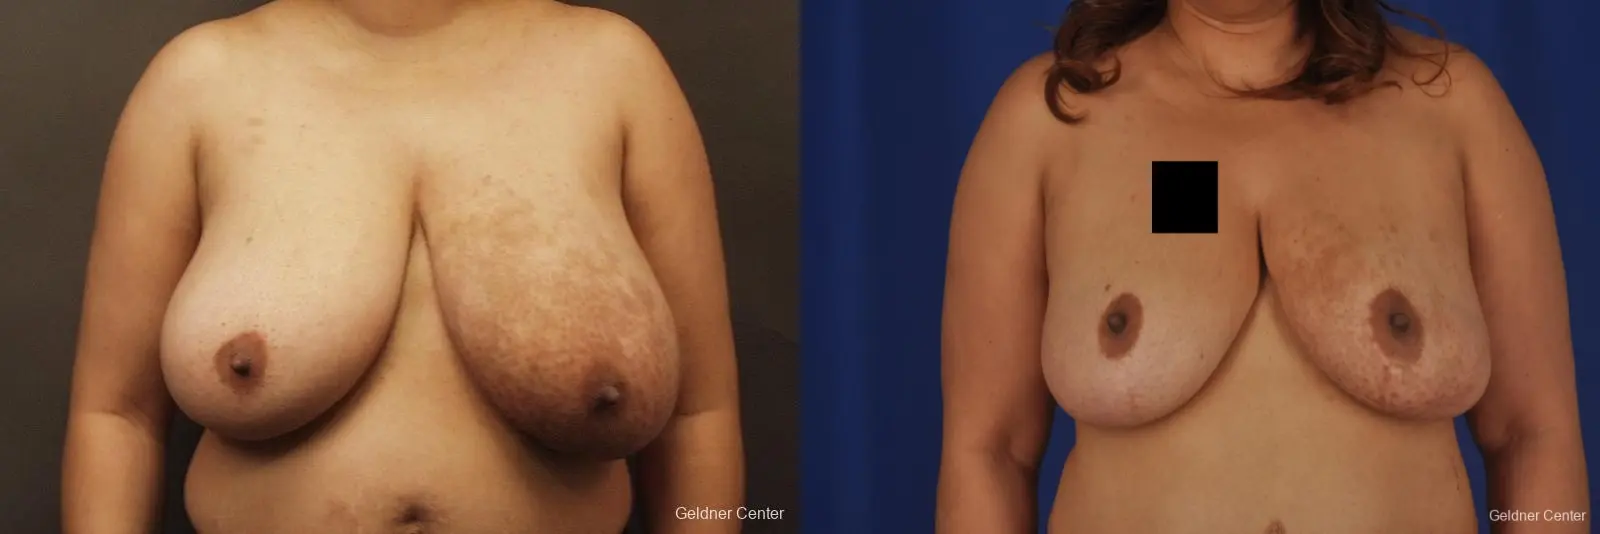 Chicago Breast Reduction 2375 - Before and After